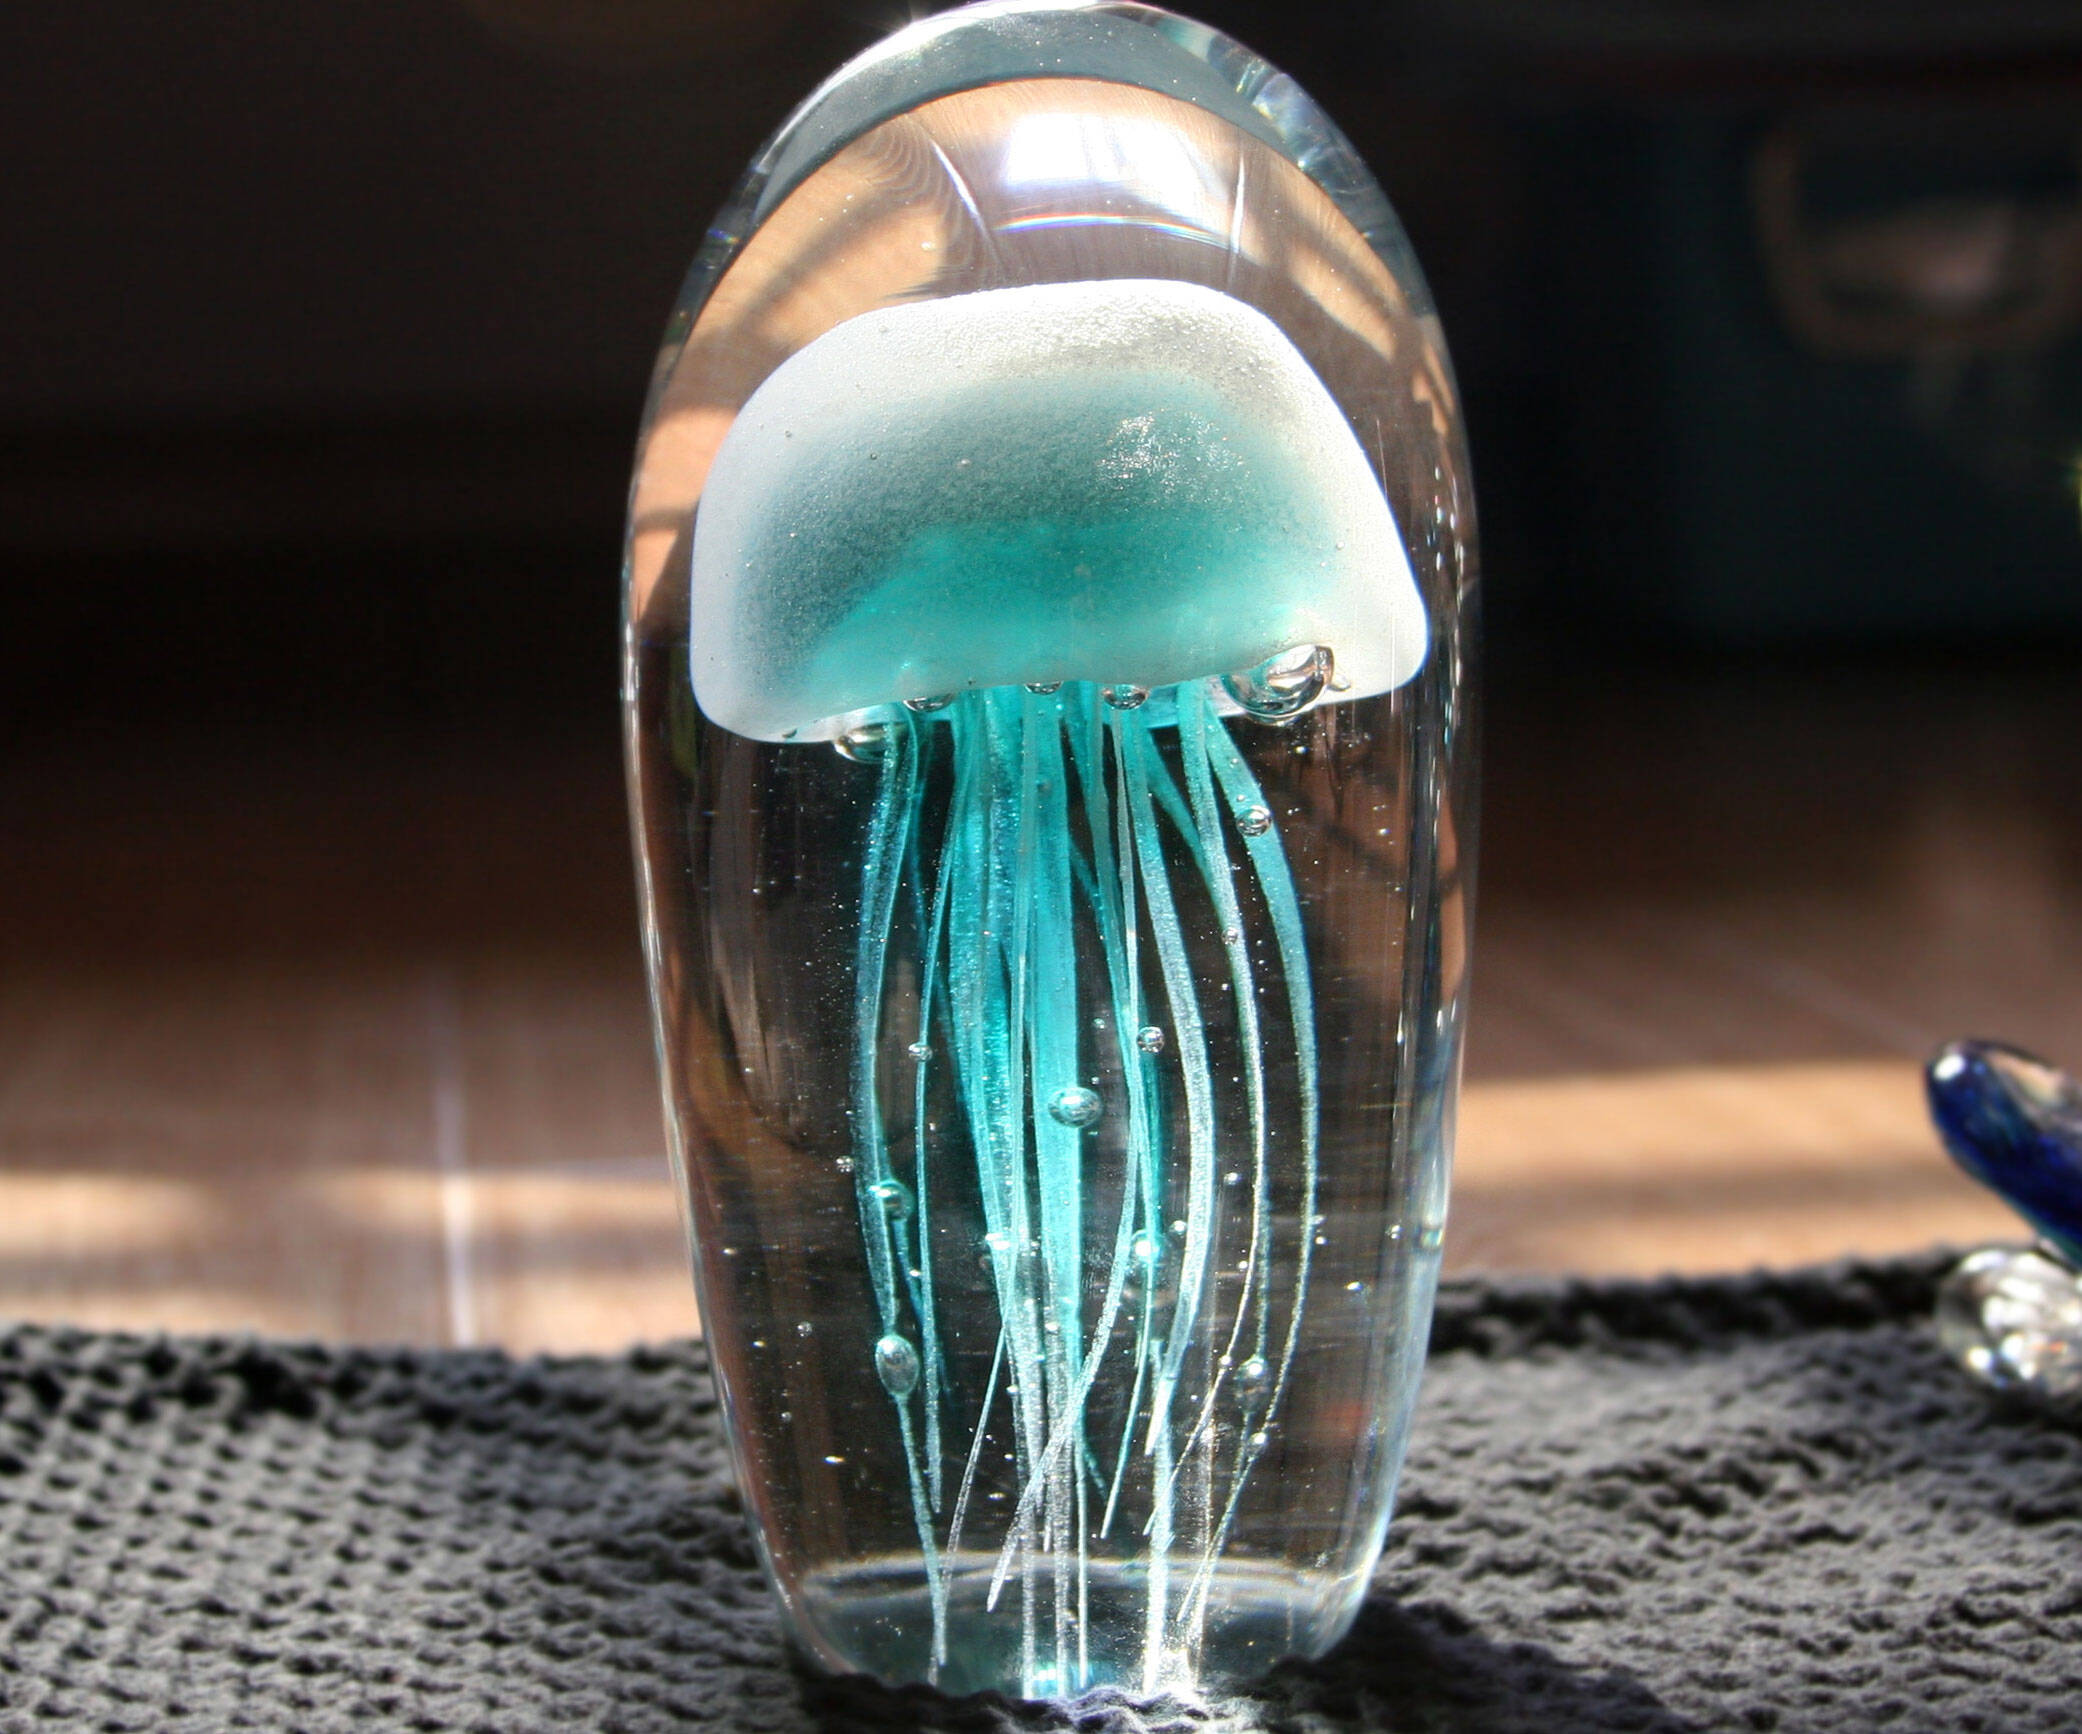 Jellyfish Paperweight - //coolthings.us